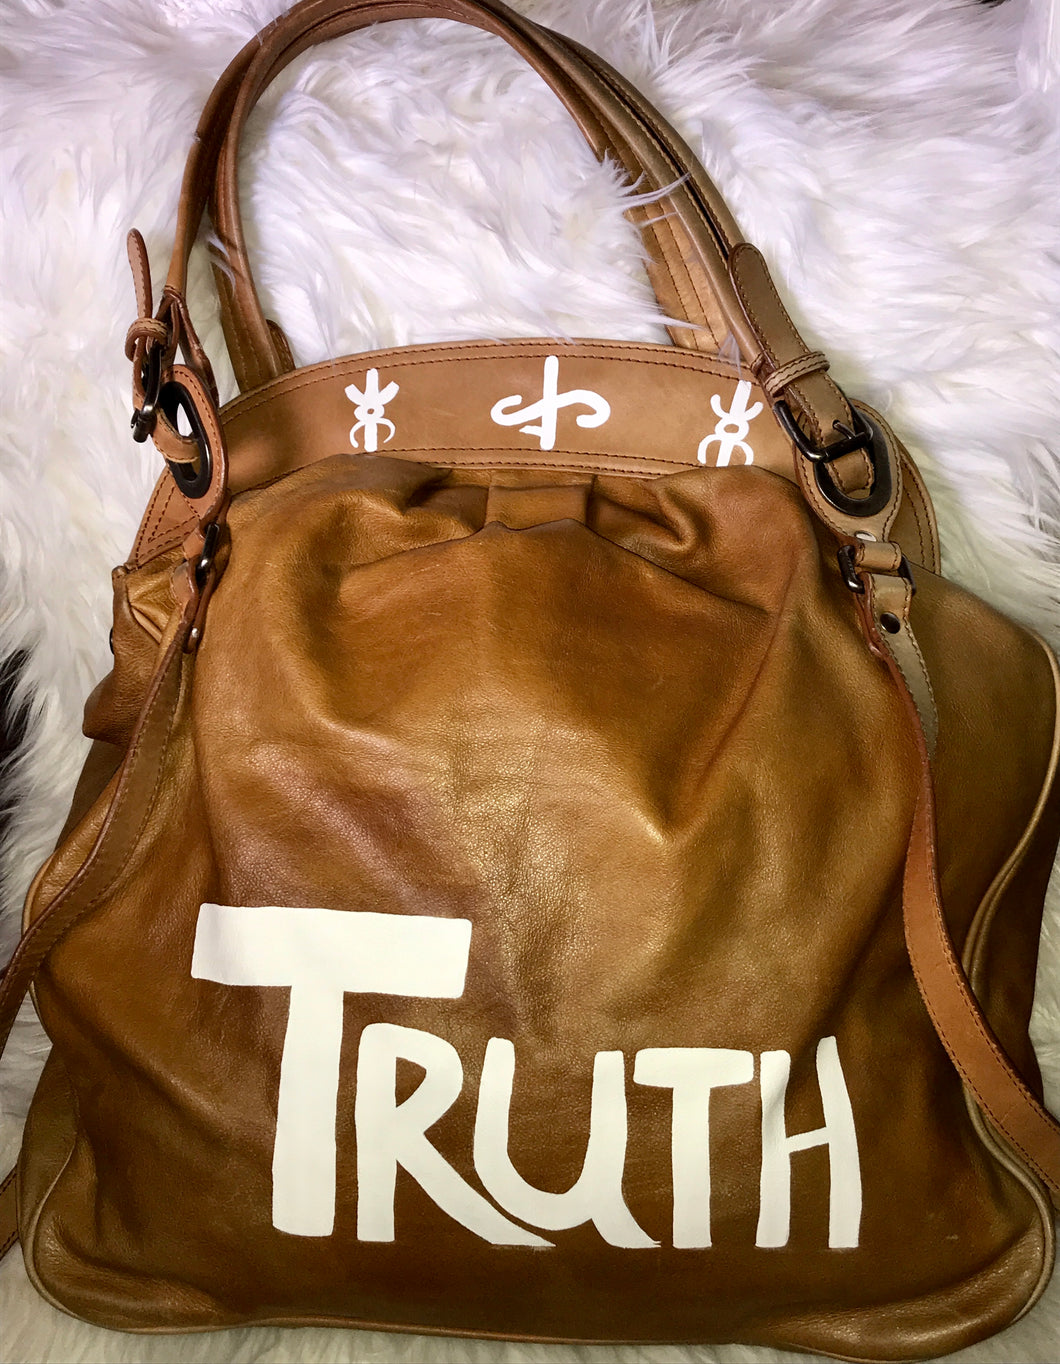 BAG OF TRUTH